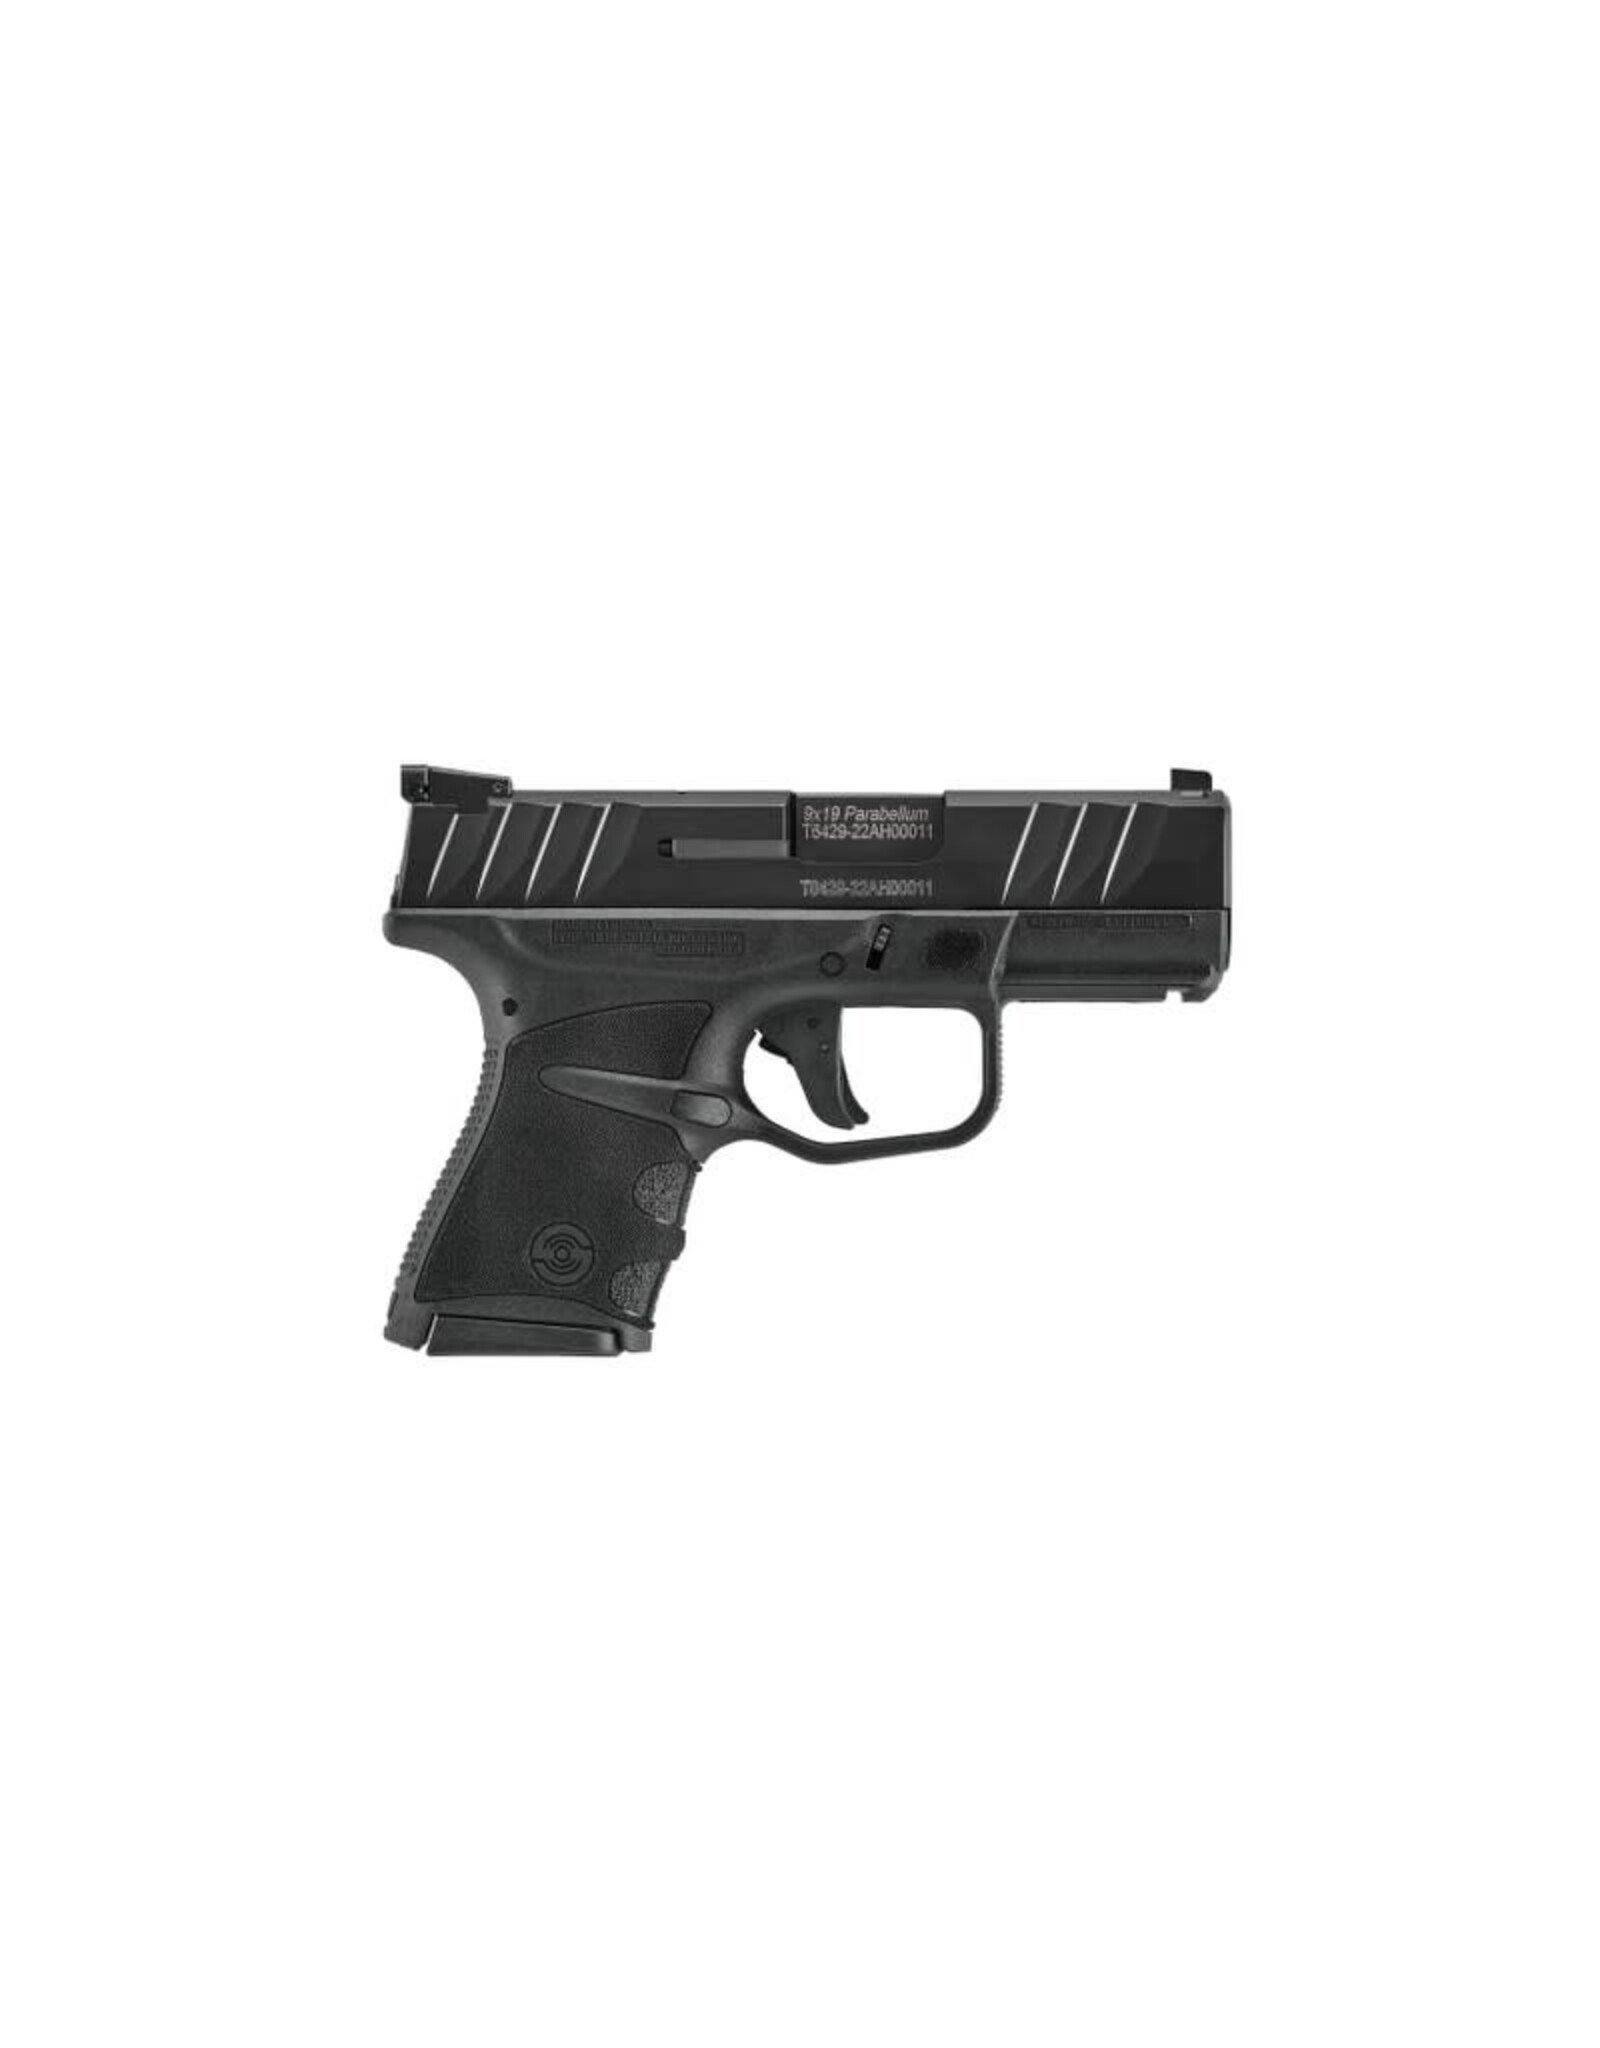 Stoeger STR-9 Micro Compact 9mm 3.29" bbl 11+1(x2)/13+1 Round Optic Ready & Night Sights